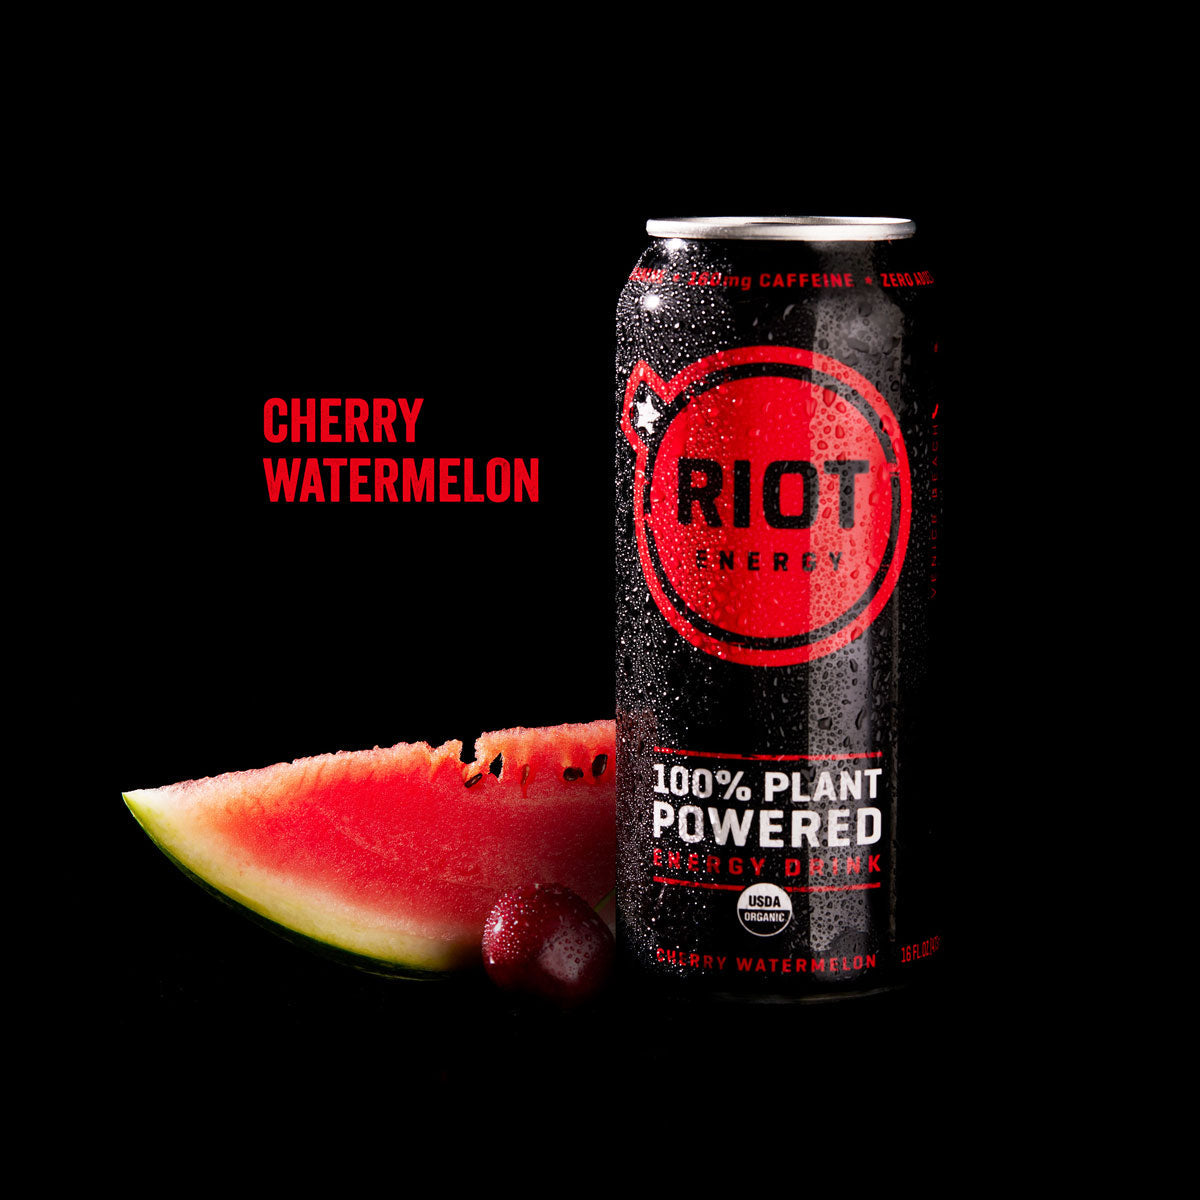 CHERRY WATERMELON by RIOT Energy